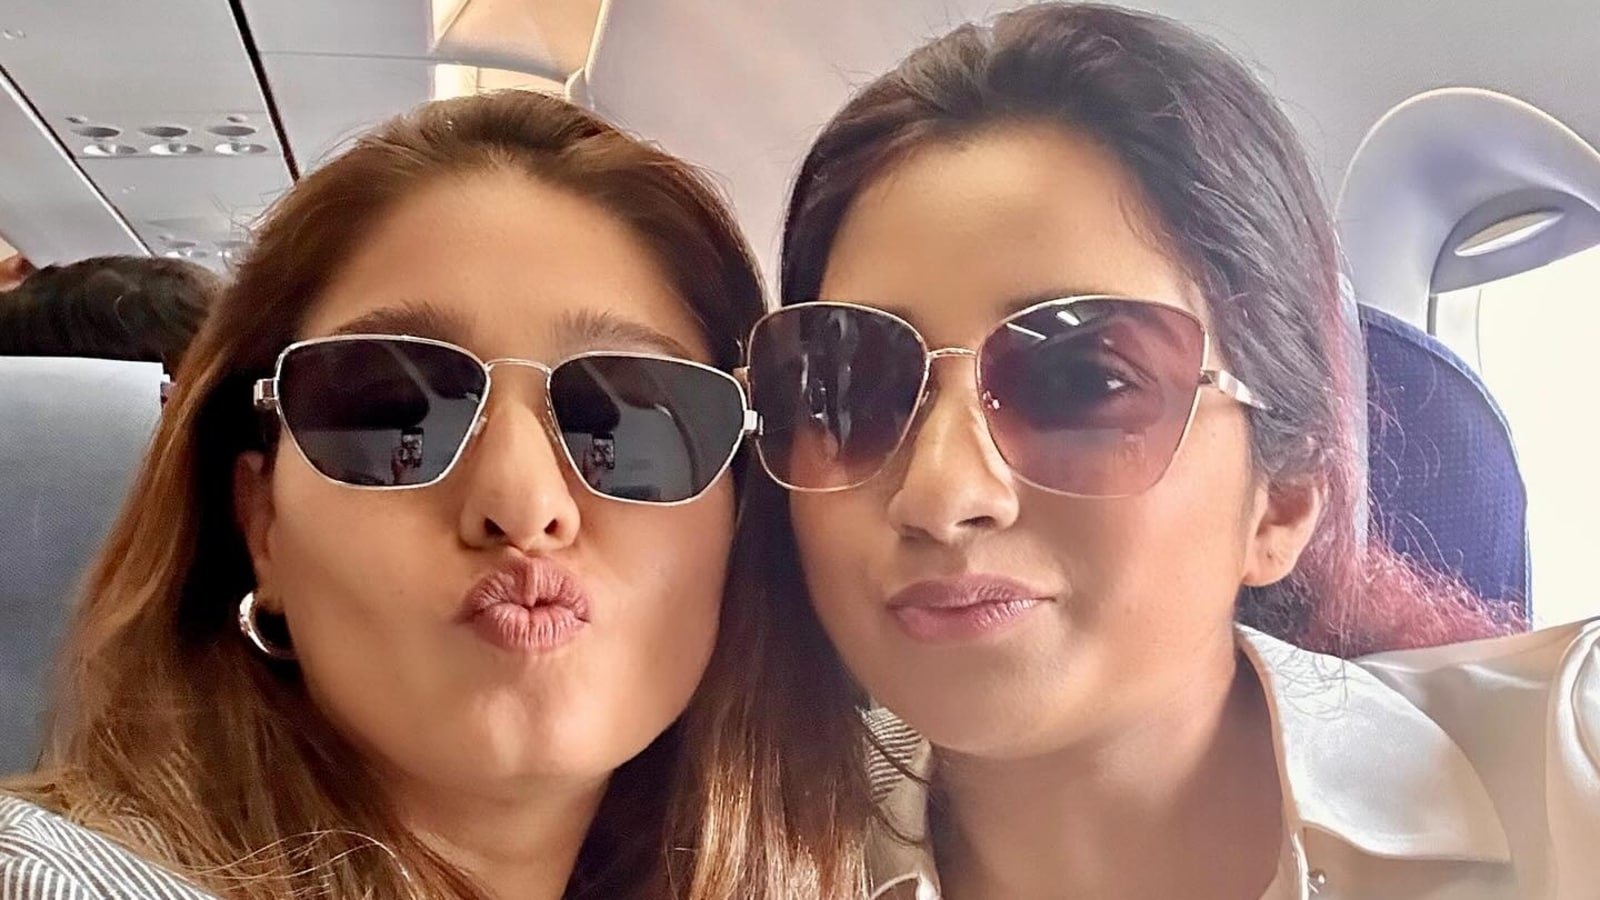 Shreya Ghoshal and Sunidhi Chauhan create a buzz on the internet with a special selfie where they make funny faces.